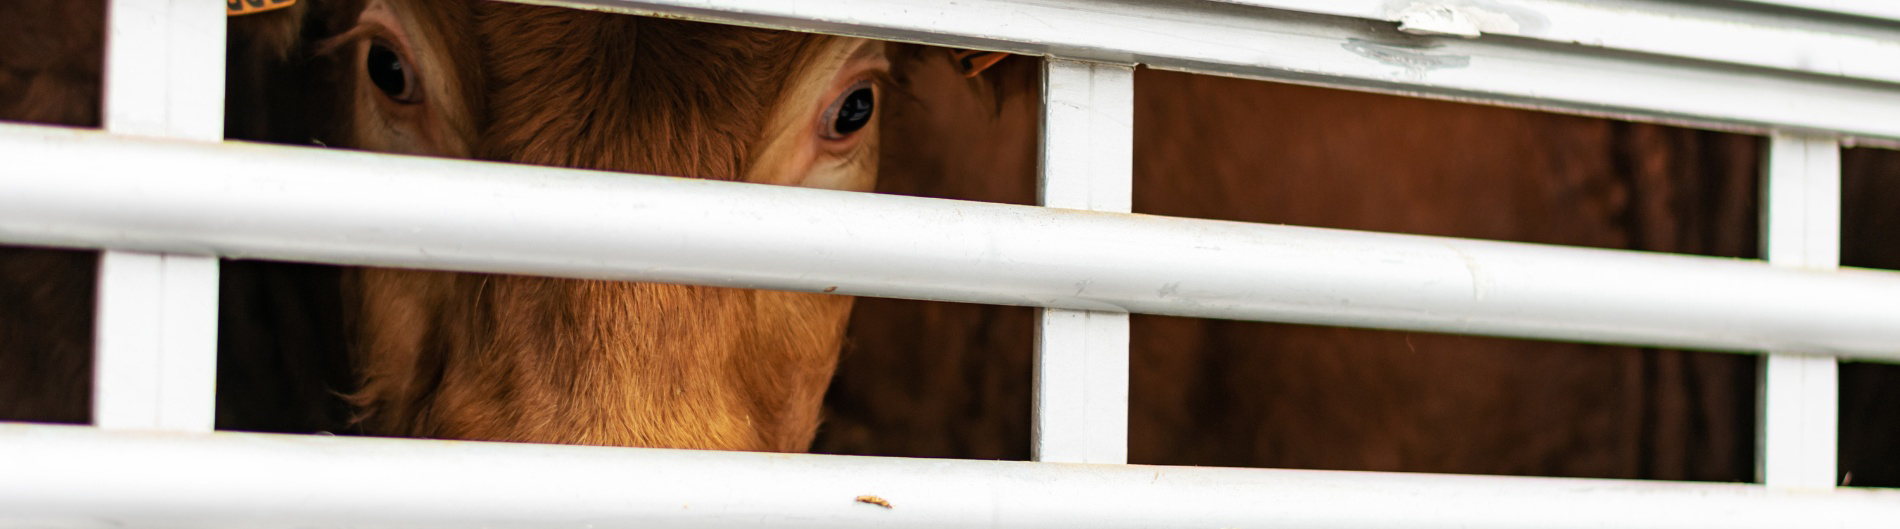 A brown cow peering out from behind the bars of a transport truck.